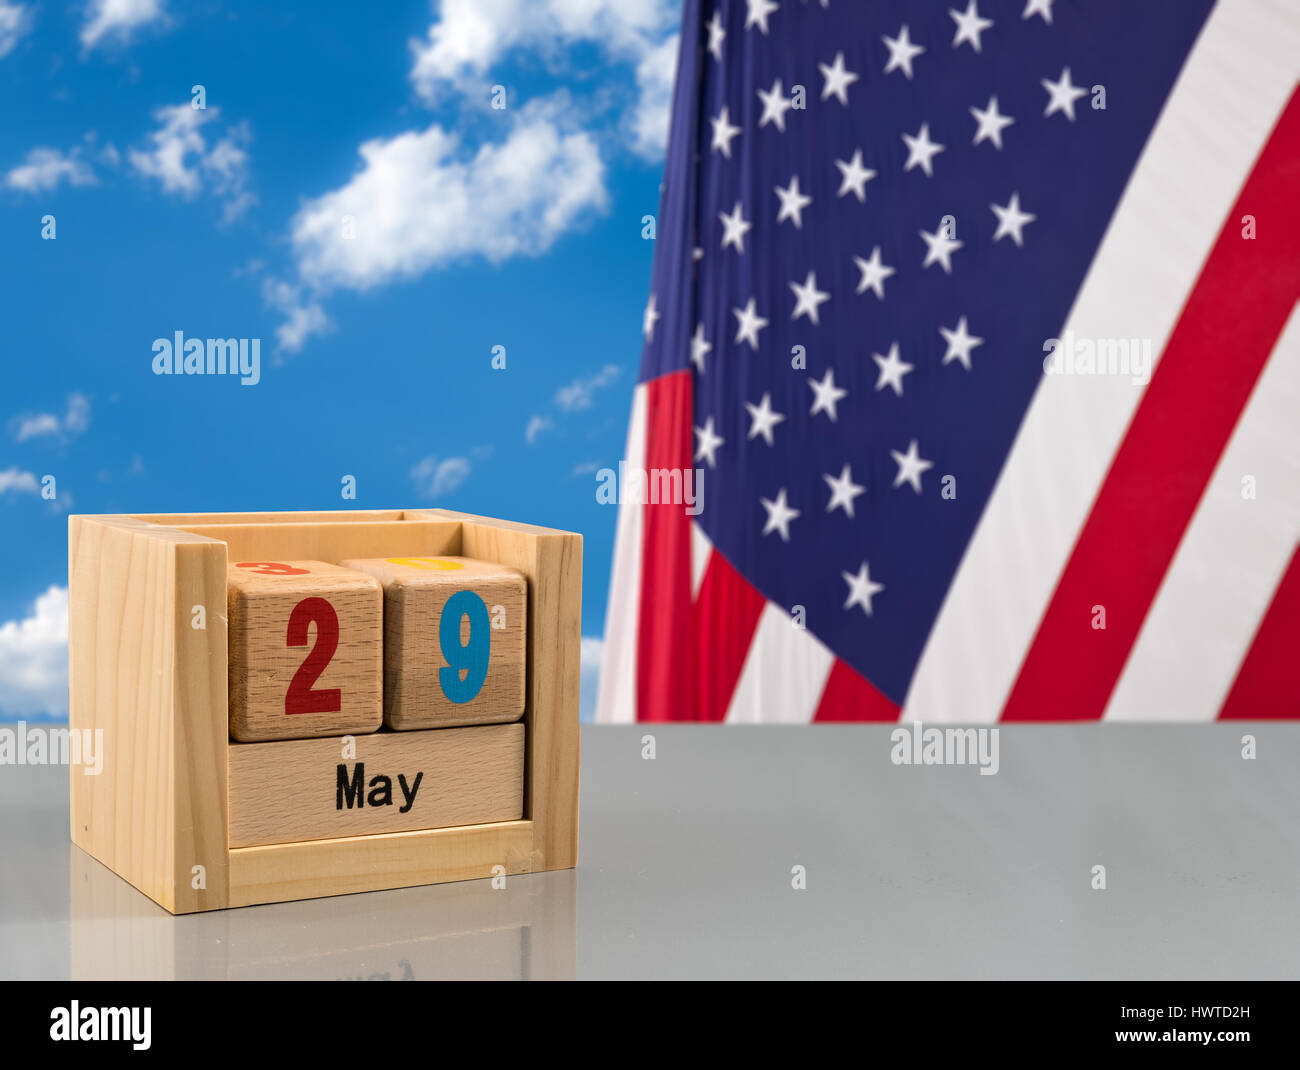 Reminder for Memorial day on 29 May 2017 Stock Photo